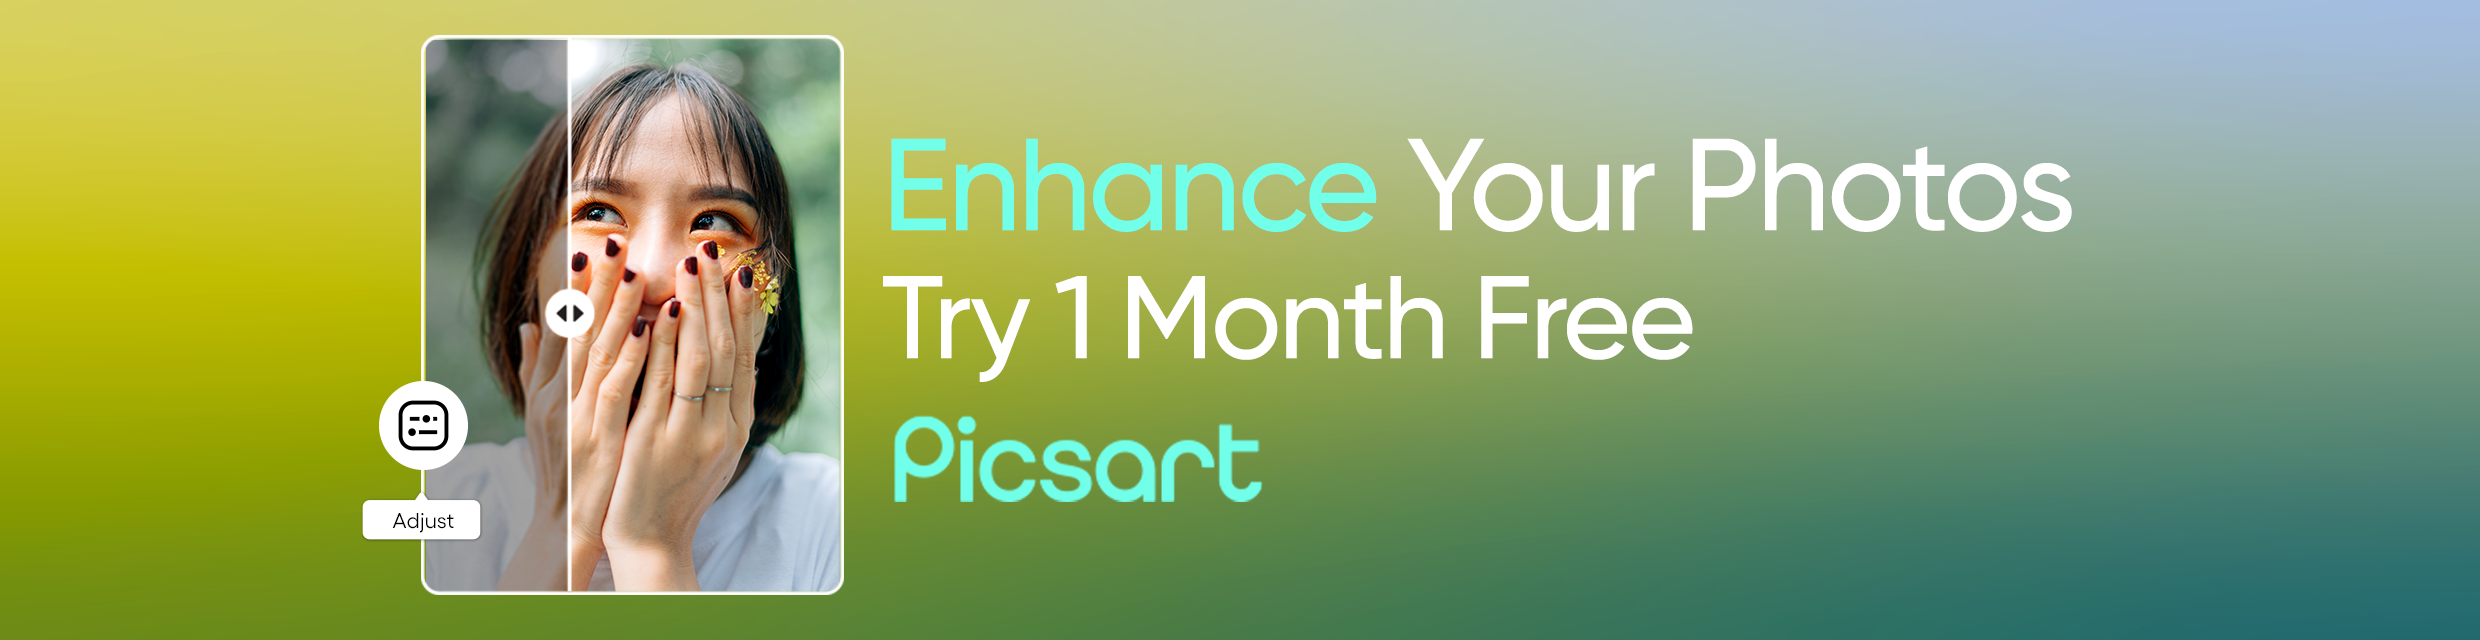 Banner ad to enhance your photos offering 1 month free of Picsart